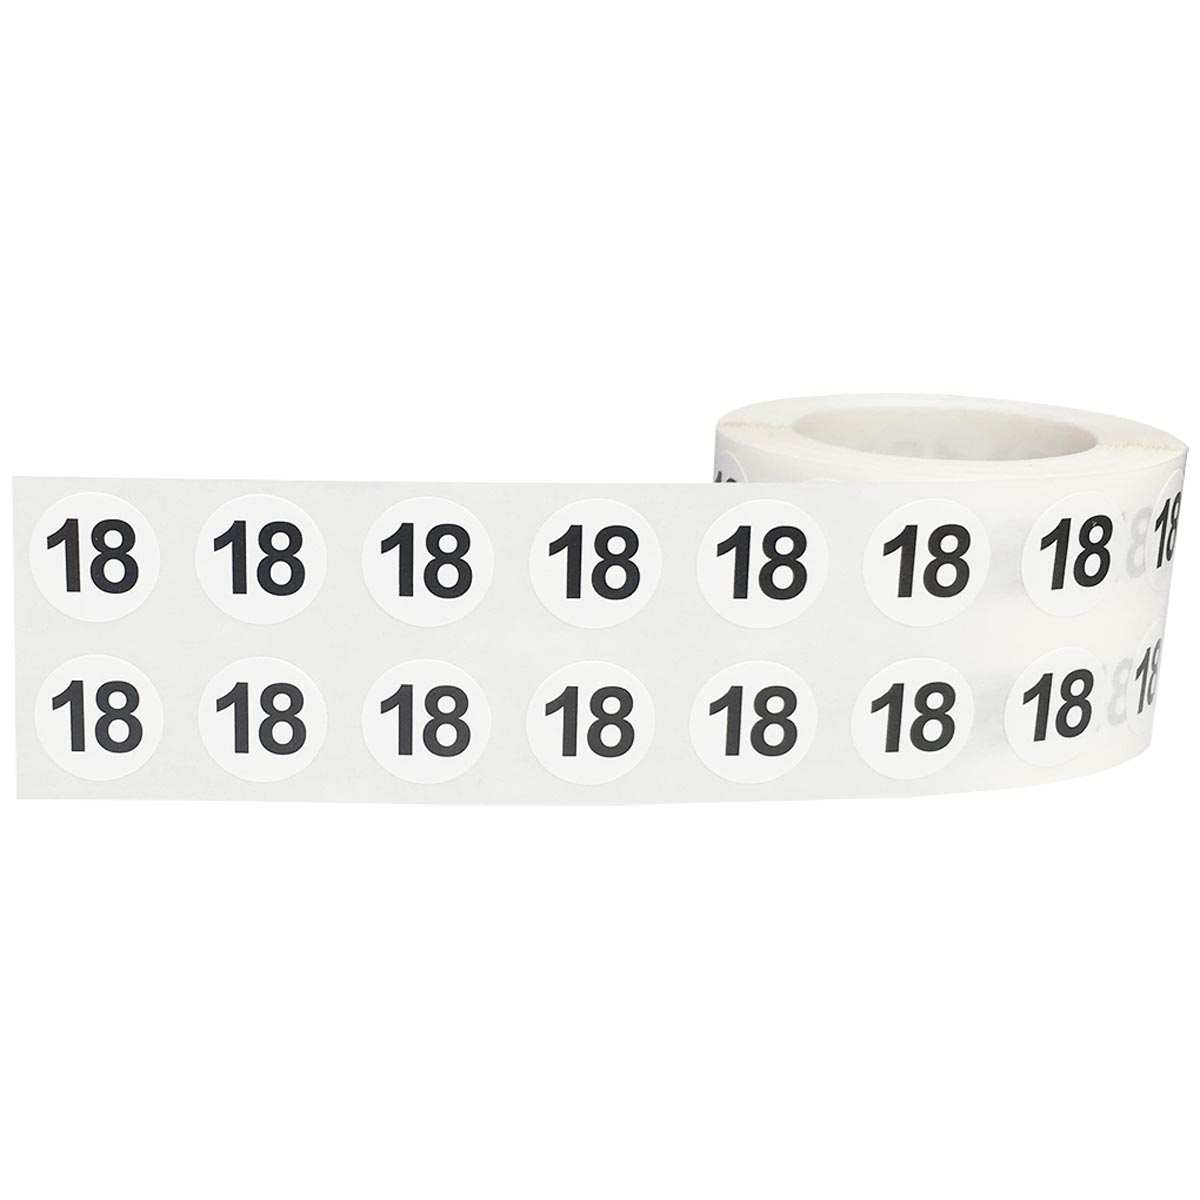 Small Number 18 Stickers 1/2 Round